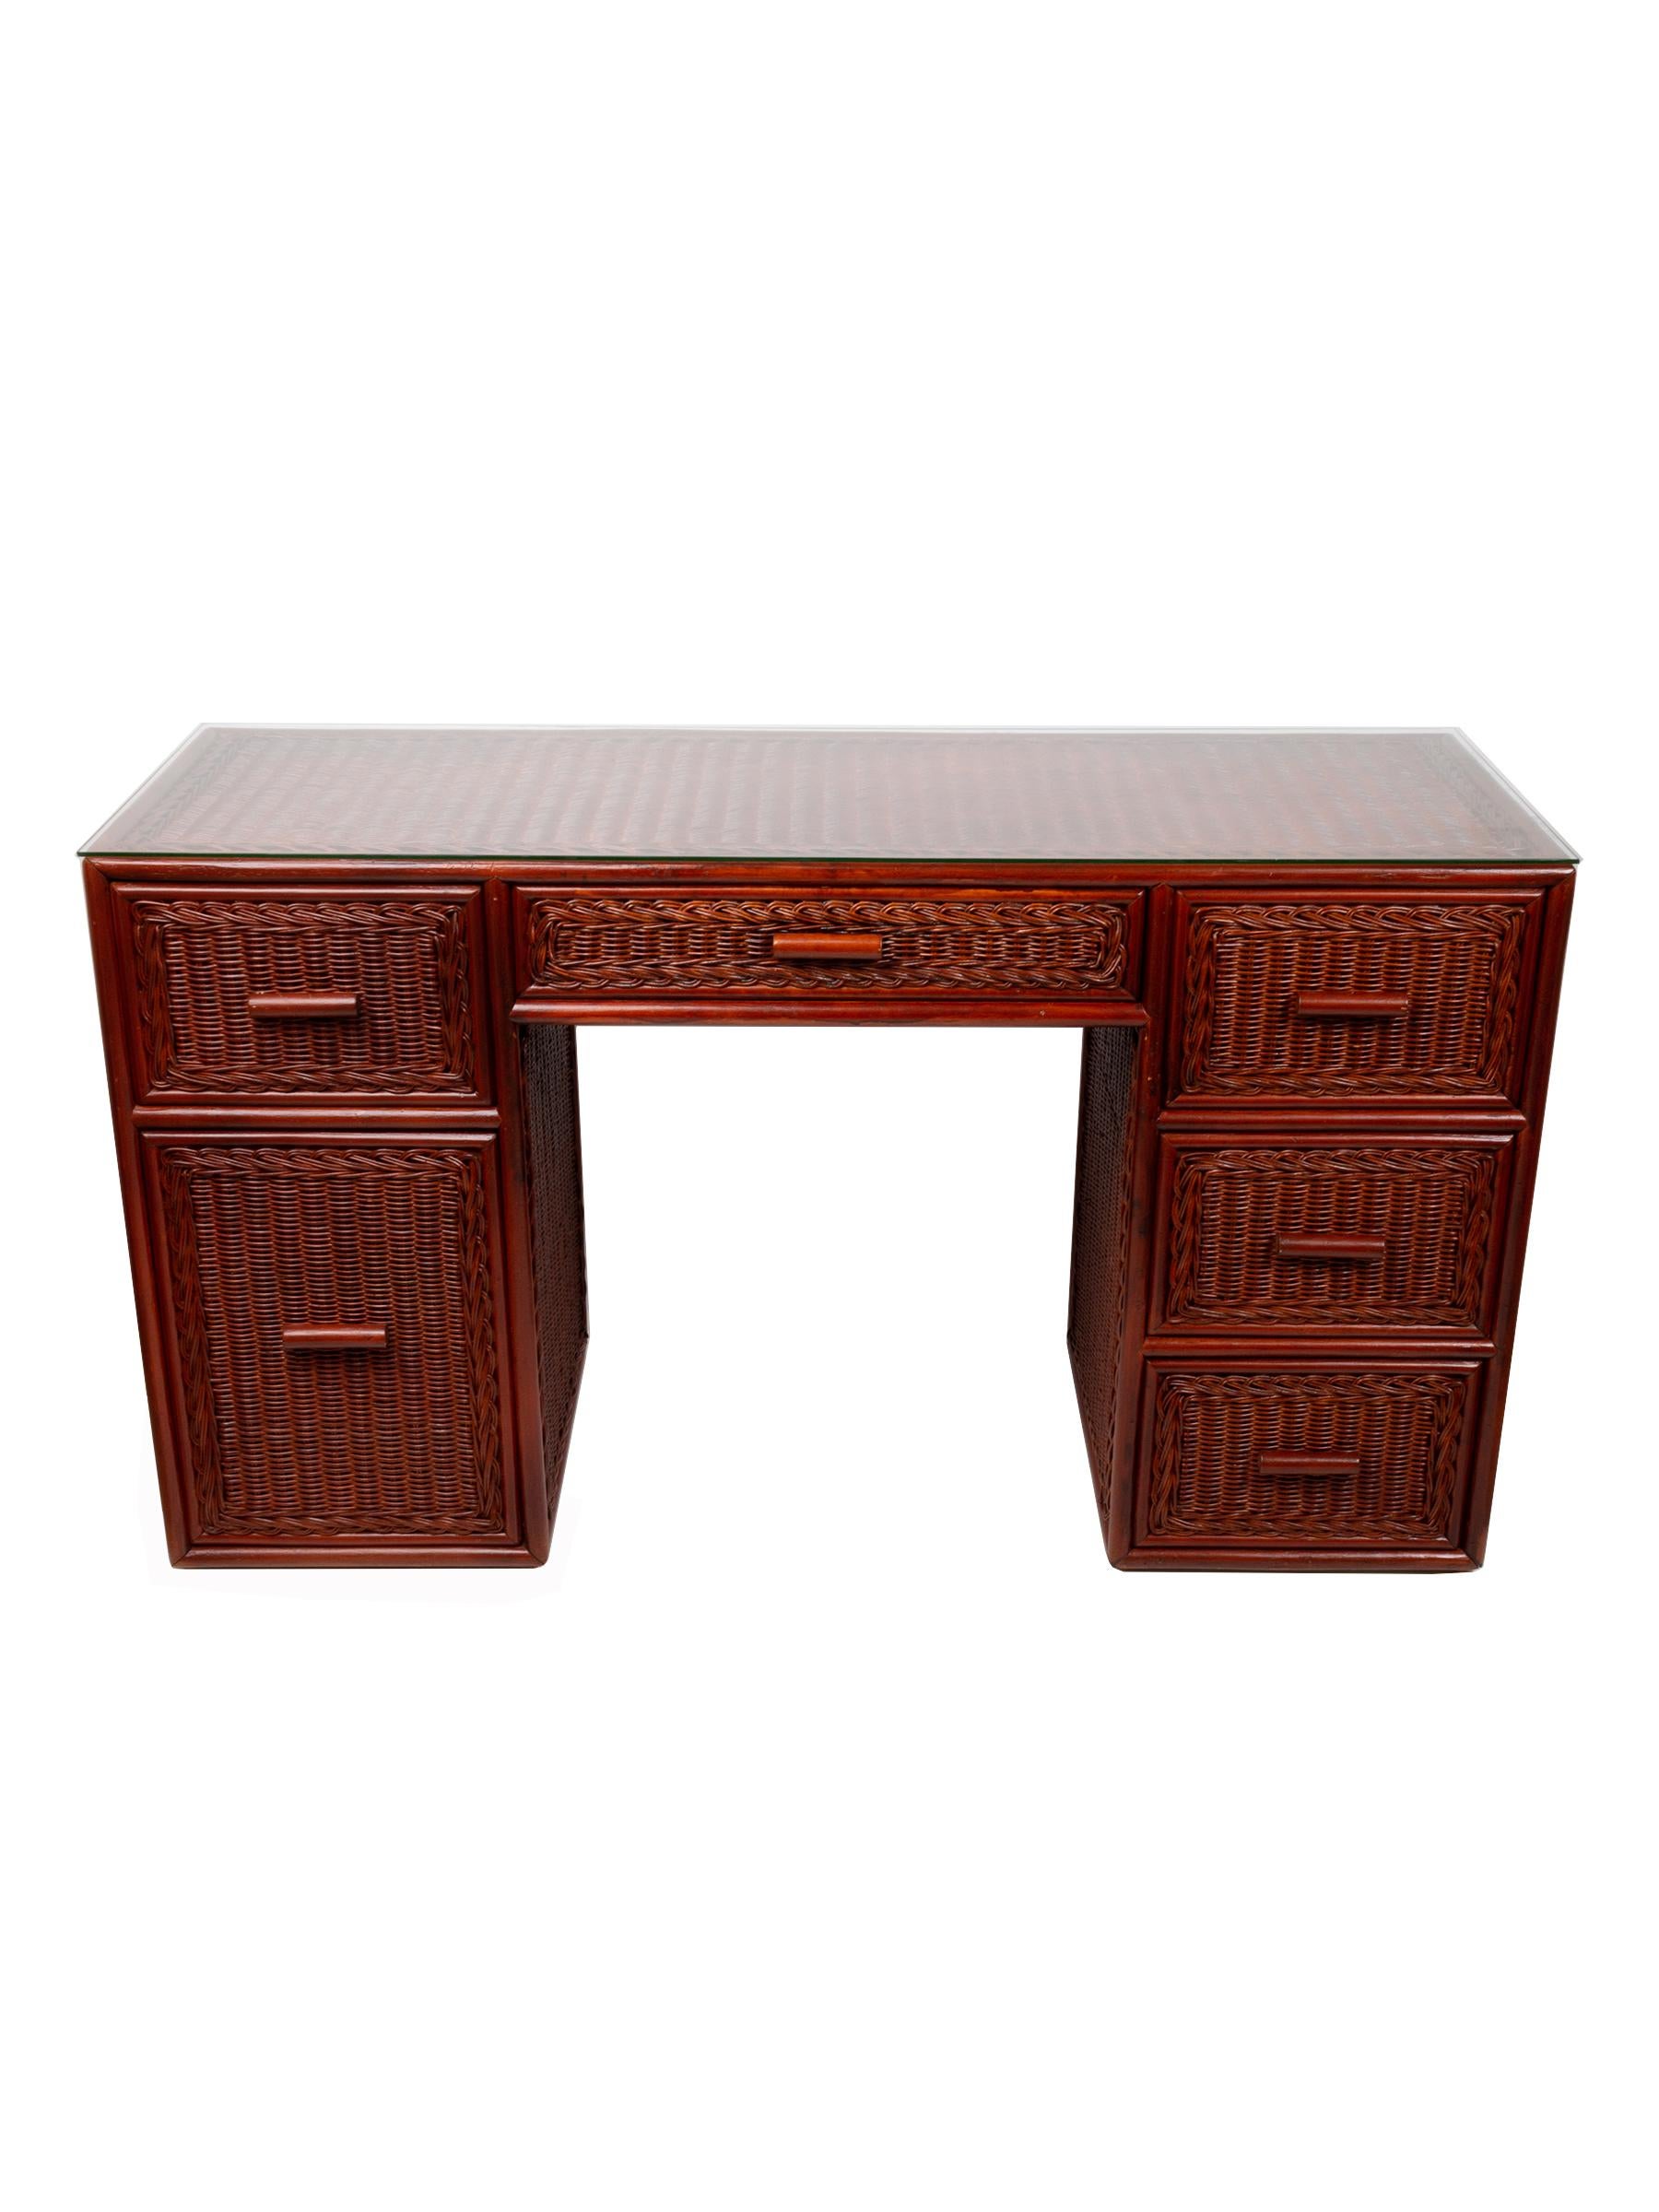 A rattan wicker pedestal desk, Spain, circa 1980.
Comprised of six drawers, one of which is a double deep drawer ideal for files.
Neatly proportioned. Presented with original glass top (micro nibbles to two of the corners, not noticeable,